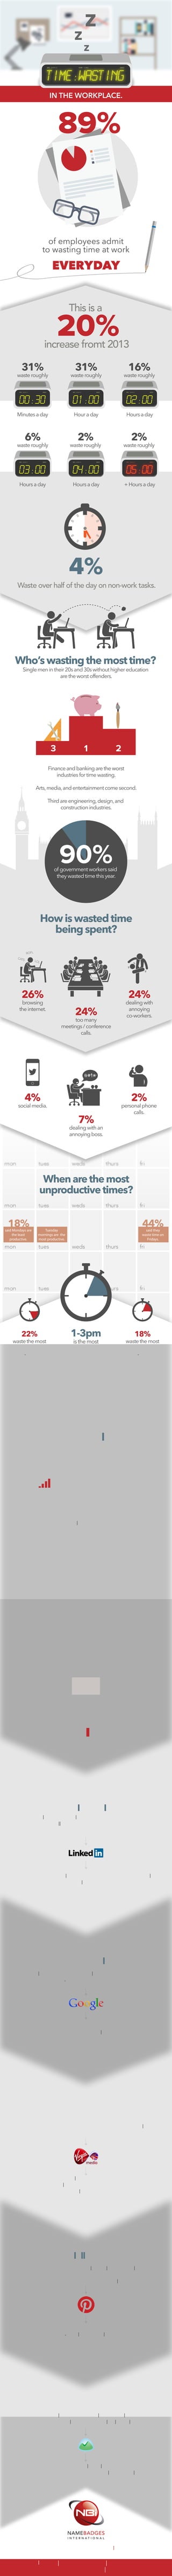 z
z
z
TIME:Wasting
DATE: 01/01/11 ALARM: 5:3012 SNOOZE
mon tues weds thurs fri
Tuesday
mornings are the
most productive.
said they
waste time on
Fridays.
Whenarethemost
unproductivetimes?
44%said Mondays are
the least
productive.
18%
89%
of employees admit
to wasting time at work
EVERYDAY
20%increase fromt 2013
4%
Waste over half of the day on non-work tasks.
This is a
00:30
DATE: 01/01/11 SNOOZE
31%
wasteroughly
Minutesa day
01:00
DATE: 01/01/11 SNOOZE
31%
wasteroughly
Houraday
02:00
DATE: 01/01/11 SNOOZE
16%
wasteroughly
Hoursaday
03:00
DATE: 01/01/11 SNOOZE
6%
wasteroughly
Hours a day
04:00
DATE: 01/01/11 SNOOZE
2%
wasteroughly
Hoursaday
05:00
DATE: 01/01/11 SNOOZE
2%
wasteroughly
+Hoursaday
26%
browsing
theinternet.
24%
toomany
meetings/conference
calls.
24%
dealingwith
annoying
co-workers.
7%
dealingwithan
annoyingboss.
4%
socialmedia.
2%
personalphone
calls.
Financeandbankingaretheworst
industriesfortimewasting.
Arts,media,andentertainmentcomesecond.
Thirdareengineering,design,and
constructionindustries.
Singlemenintheir20sand30swithouthighereducation
aretheworstoffenders.
Who’swastingthemosttime?
1 23
90%of governmentworkerssaid
theywastedtimethisyear.
Howiswastedtime
beingspent?
LOL
ROFL
CATS
22%
wastethemost
timebetween
3-5pm.
18%
wastethemost
timebetween
1-3pm.
1-3pm
is the most
productive
timeof the day.
Whyareemployees
wastingtime?
53%
think short breaks
increaseproductivity.
20%
areuninterested
intheirjob.
8%
lackany
incentives.
7%
areunsatisﬁed
withtheirjob.
2%
thinktheyaren’t
beingpaidenough.
What are the
SOLUTIONS?
Letemployeeslearn.
Manyemployeeswanttolearnmoreabouttheirindustryand
acquirenewskillssosendthemontraining,coursesand
conferences.
LinkedInoffersemployeesabudgettouseonprofessional
educationrelatedtotheirjob.
Createspacesforalonetime.
Giveemployeesaspacetoworkalonewhentheyneedit,away
fromco-workers,bossesandnoise.
Google scattersBrainstormingpodsandotherbreakareas
throughoutthebuilding.
Boostincentivewithrewards
andrecognition.
Offering greatbonusschemesandrewardscangiveemployees
an incentivetoworktheirhardesttoreapthebeneﬁts.
Virgin Mediaoffersregularmoneyincentiveswithitsbonus
schemeandevenholdsgraduationeventsforapprenticeswho
completetraining.
BeatFridaylullswithexercise.
Exercisehasbeenproventohelpemployeesstayalertand
productive,sohavingafreegymattheofﬁceorofferinggym
membershipdiscountscanhelp.
Pinterestoffersdiscountedgymmembershipsandevena
bi-weeklyrunningclub.
Cutdownonmeetings.
Don’t invitepeopletoameetingunlesstheytrulyhavetobe
thereand canaddusefulinputortakehelpfulknowledgeaway.
Base Camphaveastrictsetof rulesincludingkeepitshort,have
an agendaandinviteasfewpeopleaspossible.
www.namebadgesinternational.co.uk
Sources:
salary.com|businessinsider.com|pinterest.com
businesscasestudies.co.uk|99u.com
IN THE WORKPLACE.
 